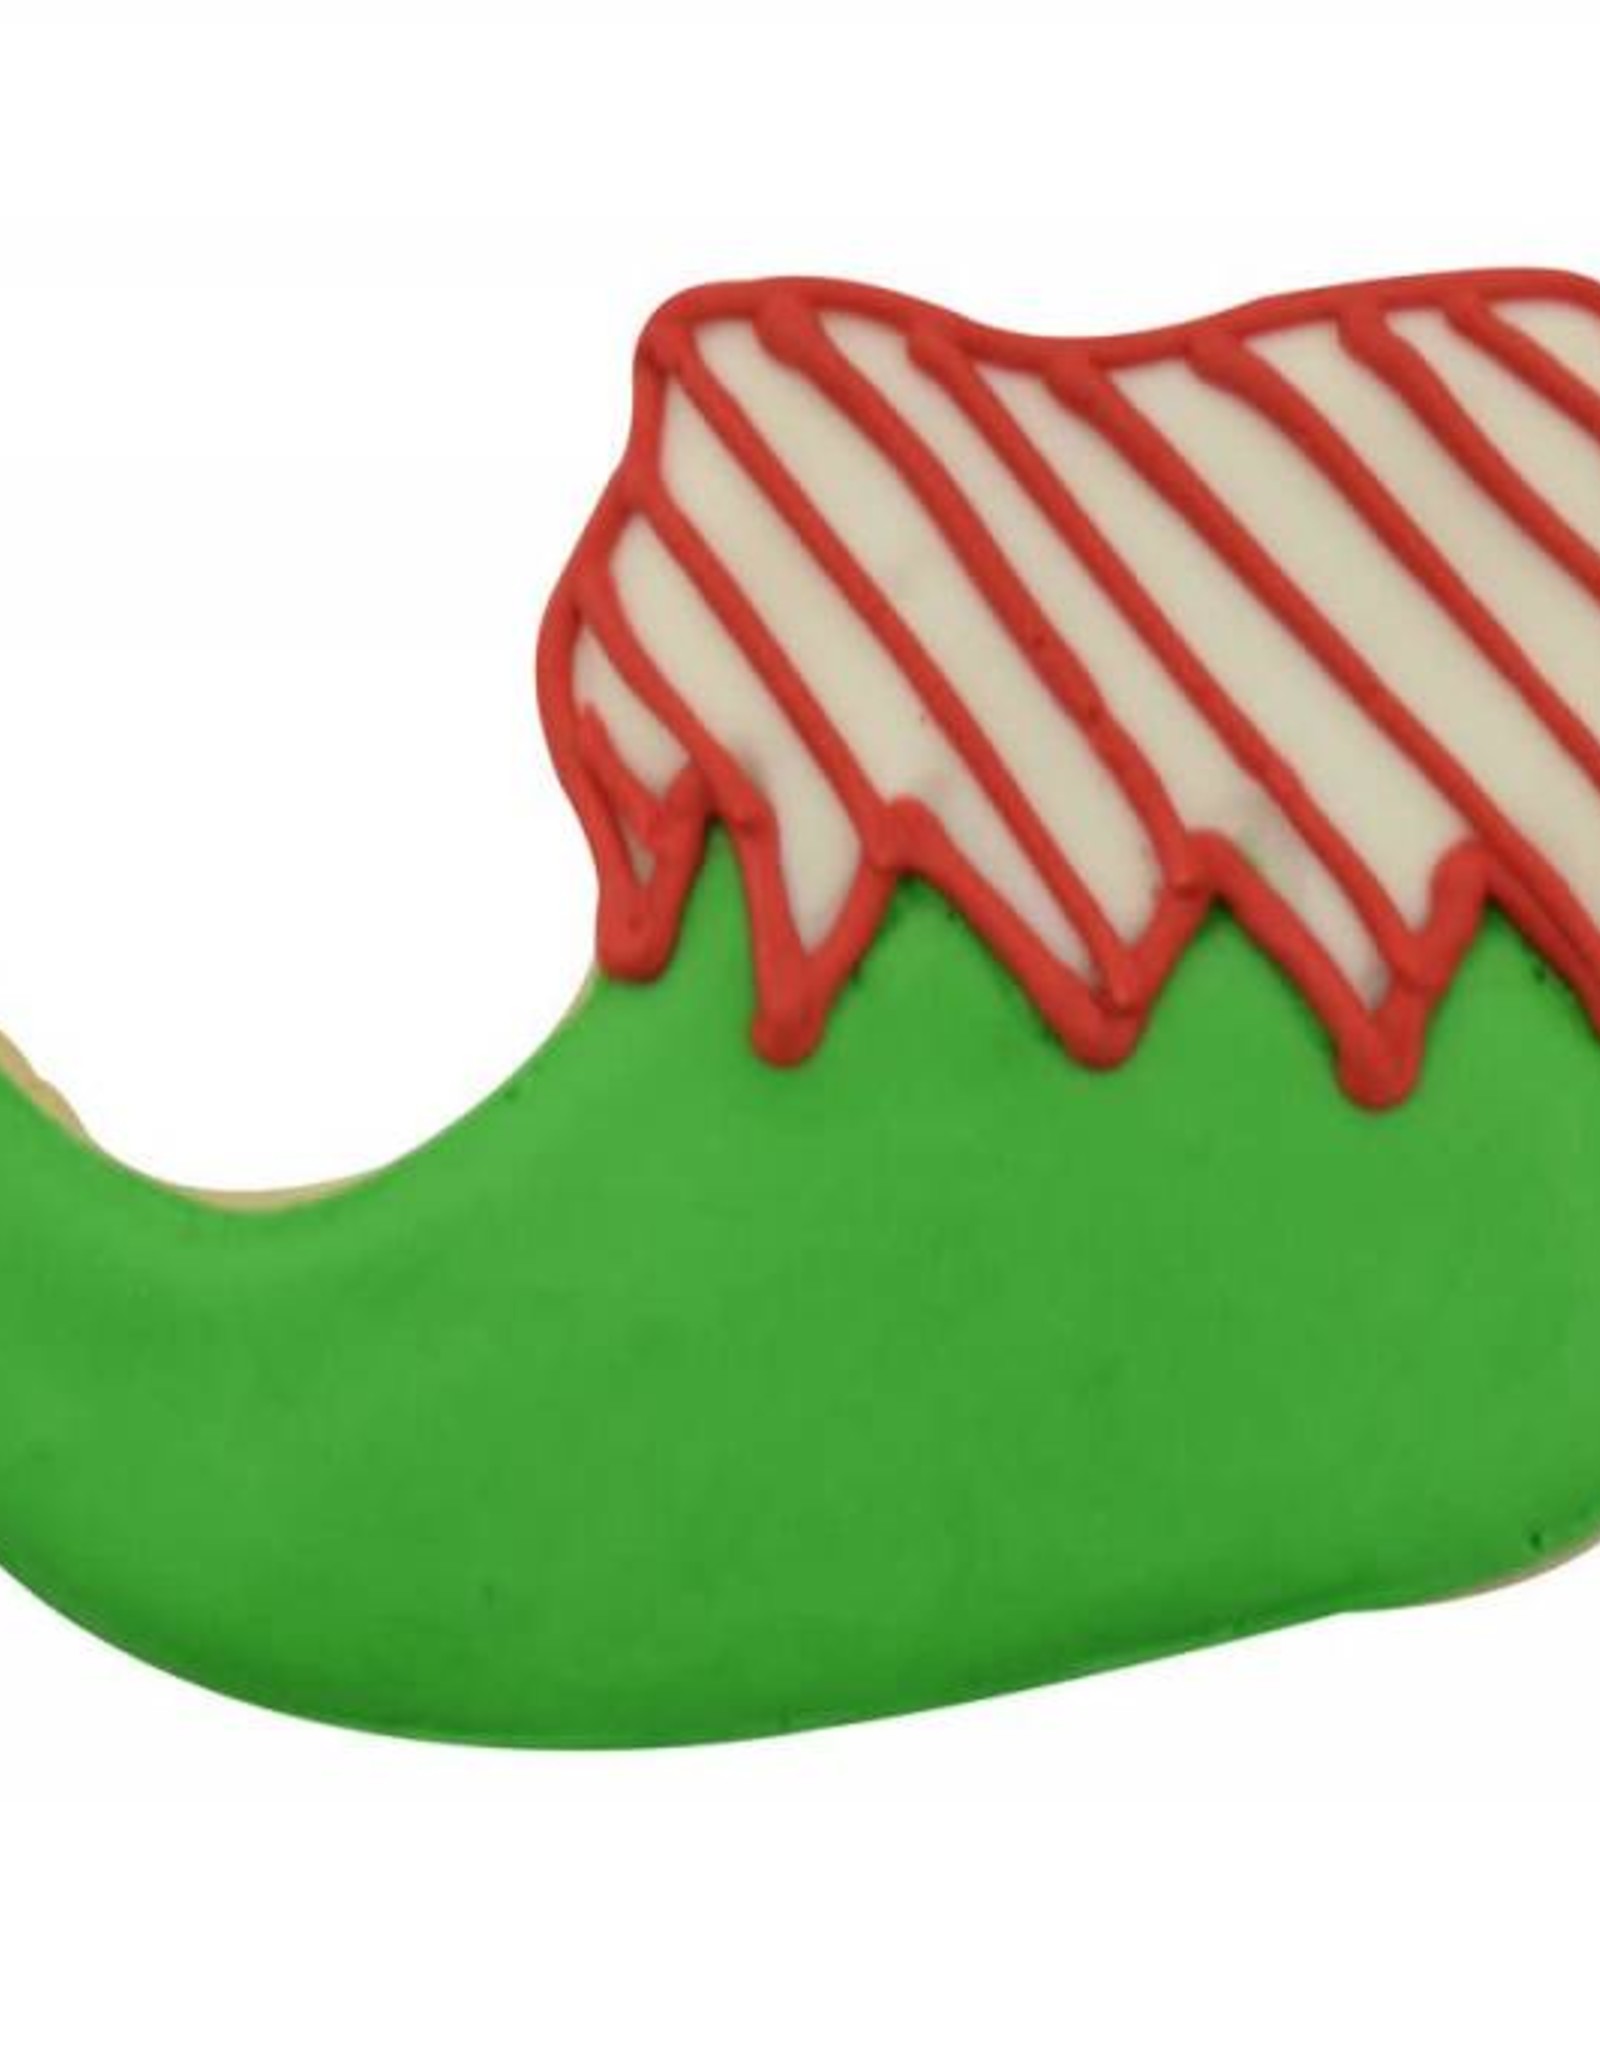 R and M Elf Shoe Cookie Cutter 3.5"